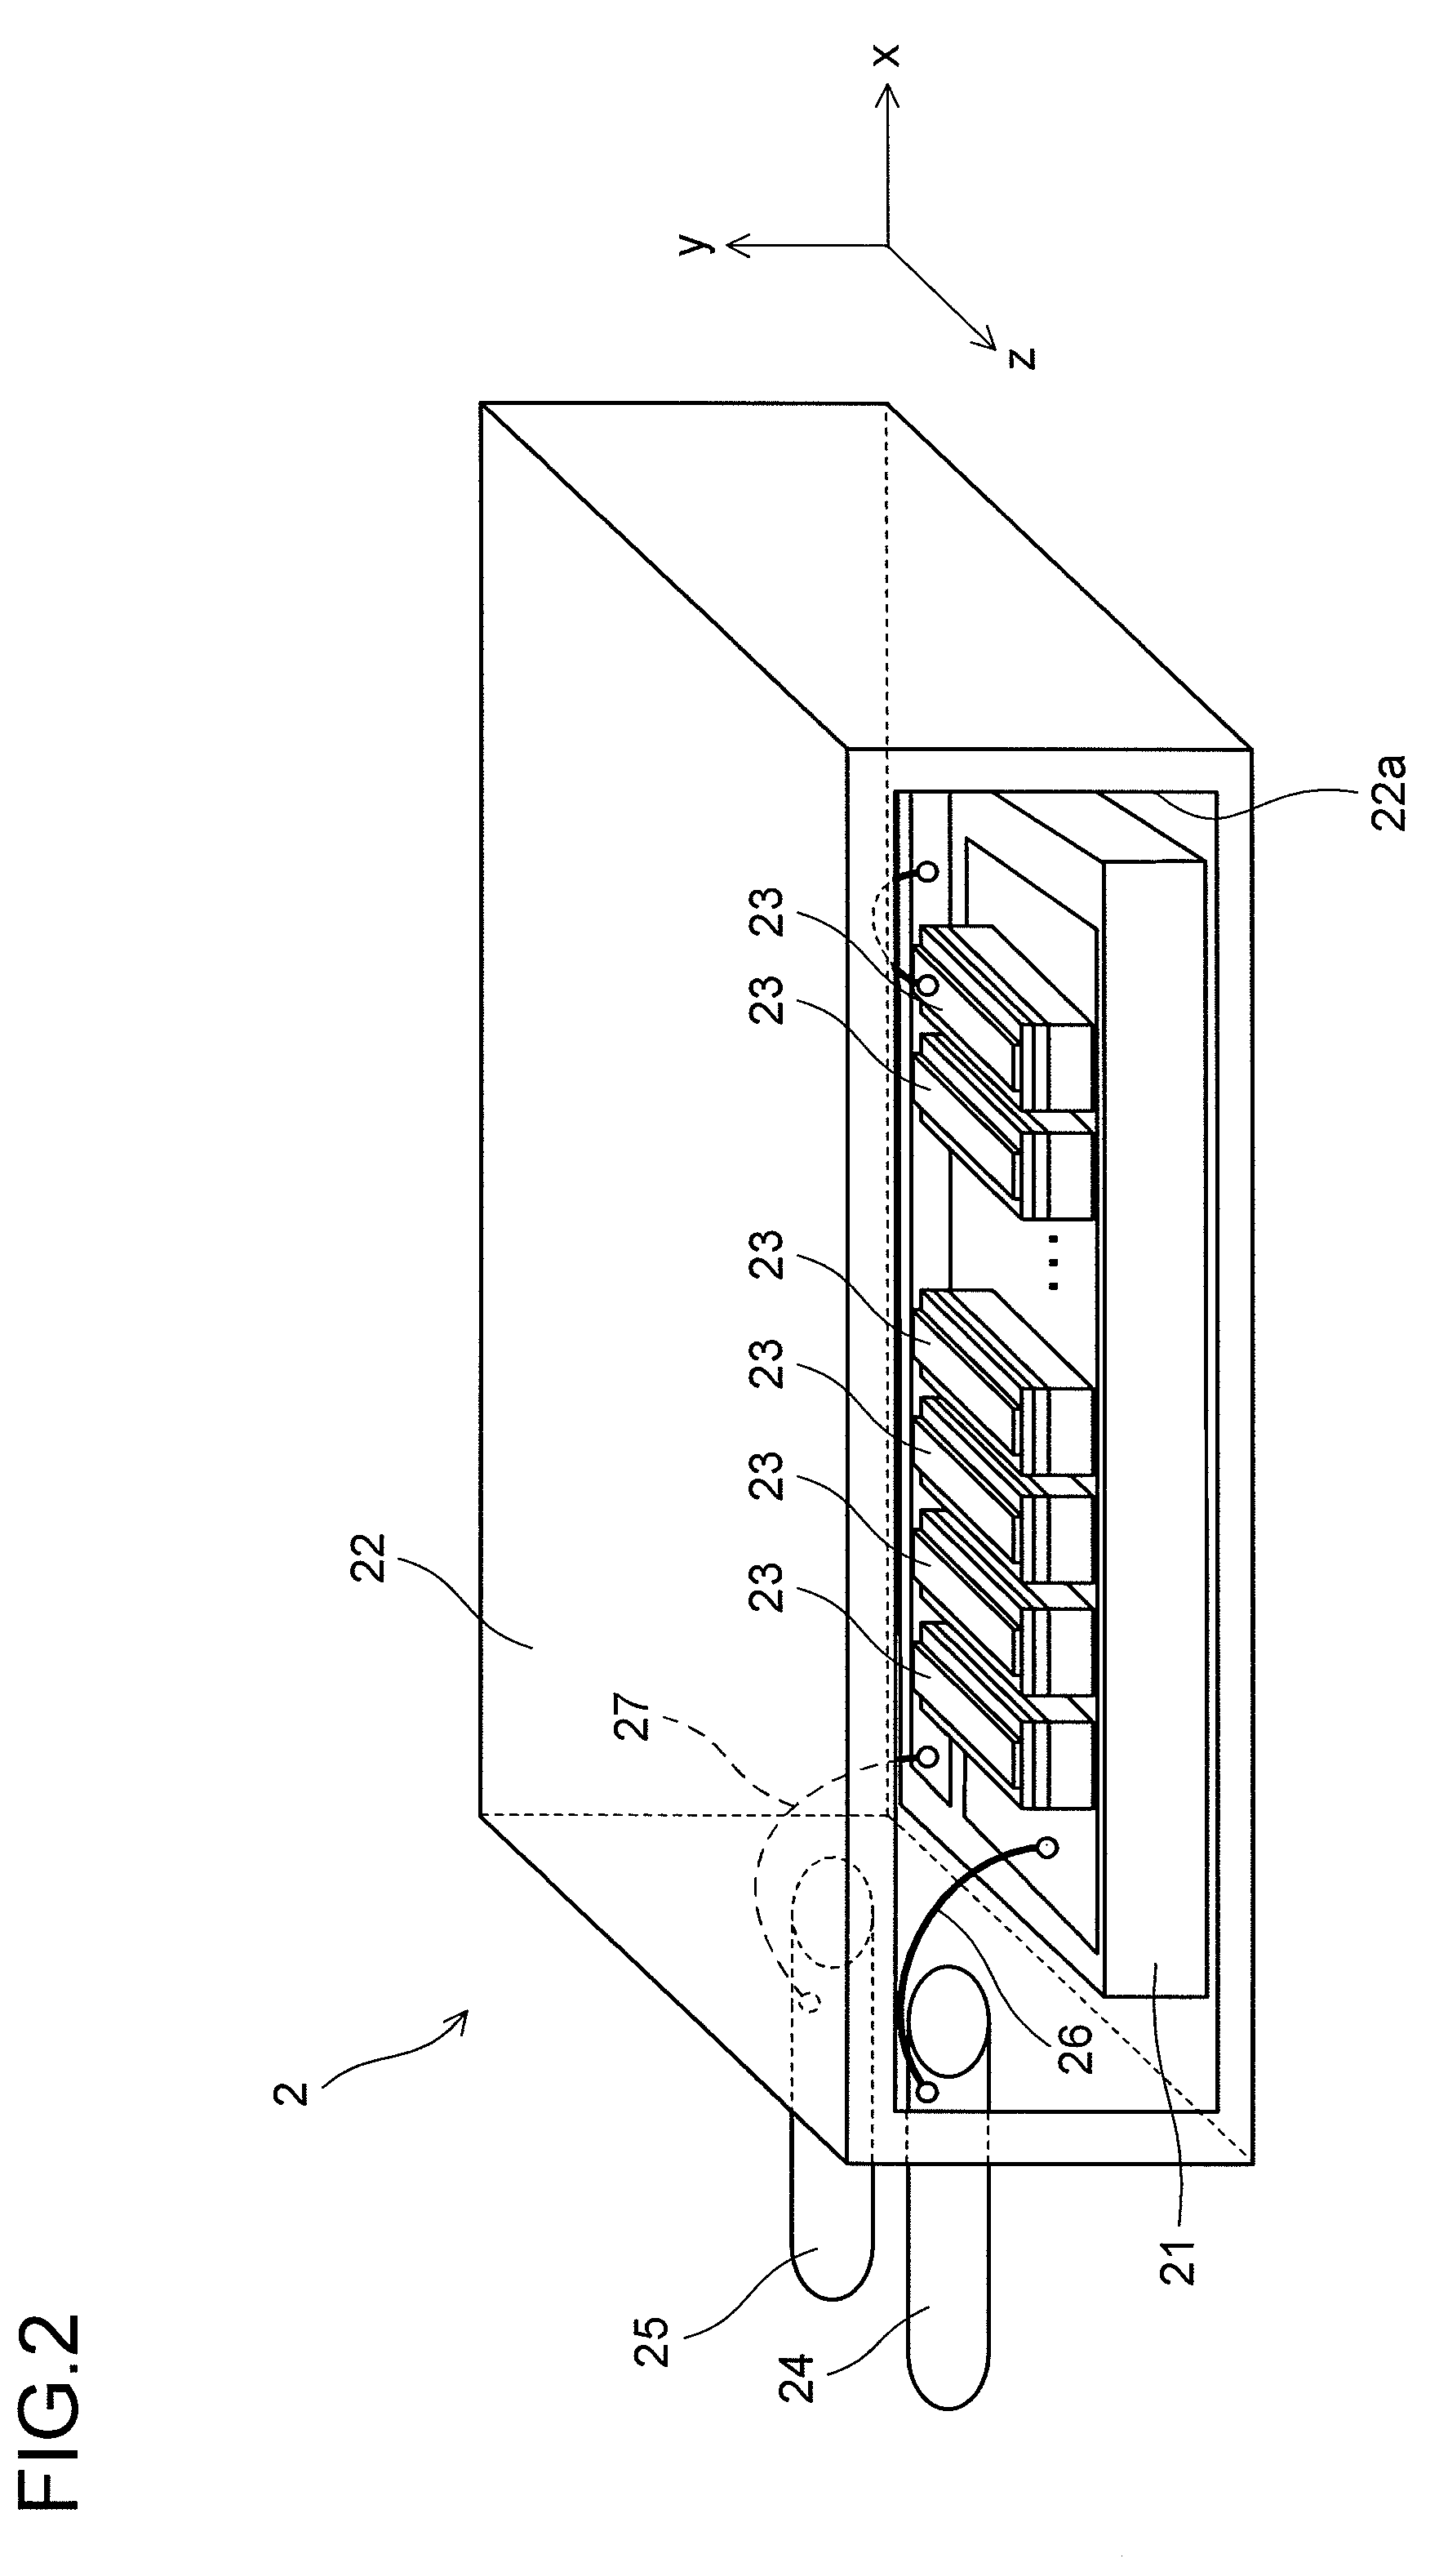 Light guide member, laser light guide structure body, laser shining apparatus, and light source apparatus